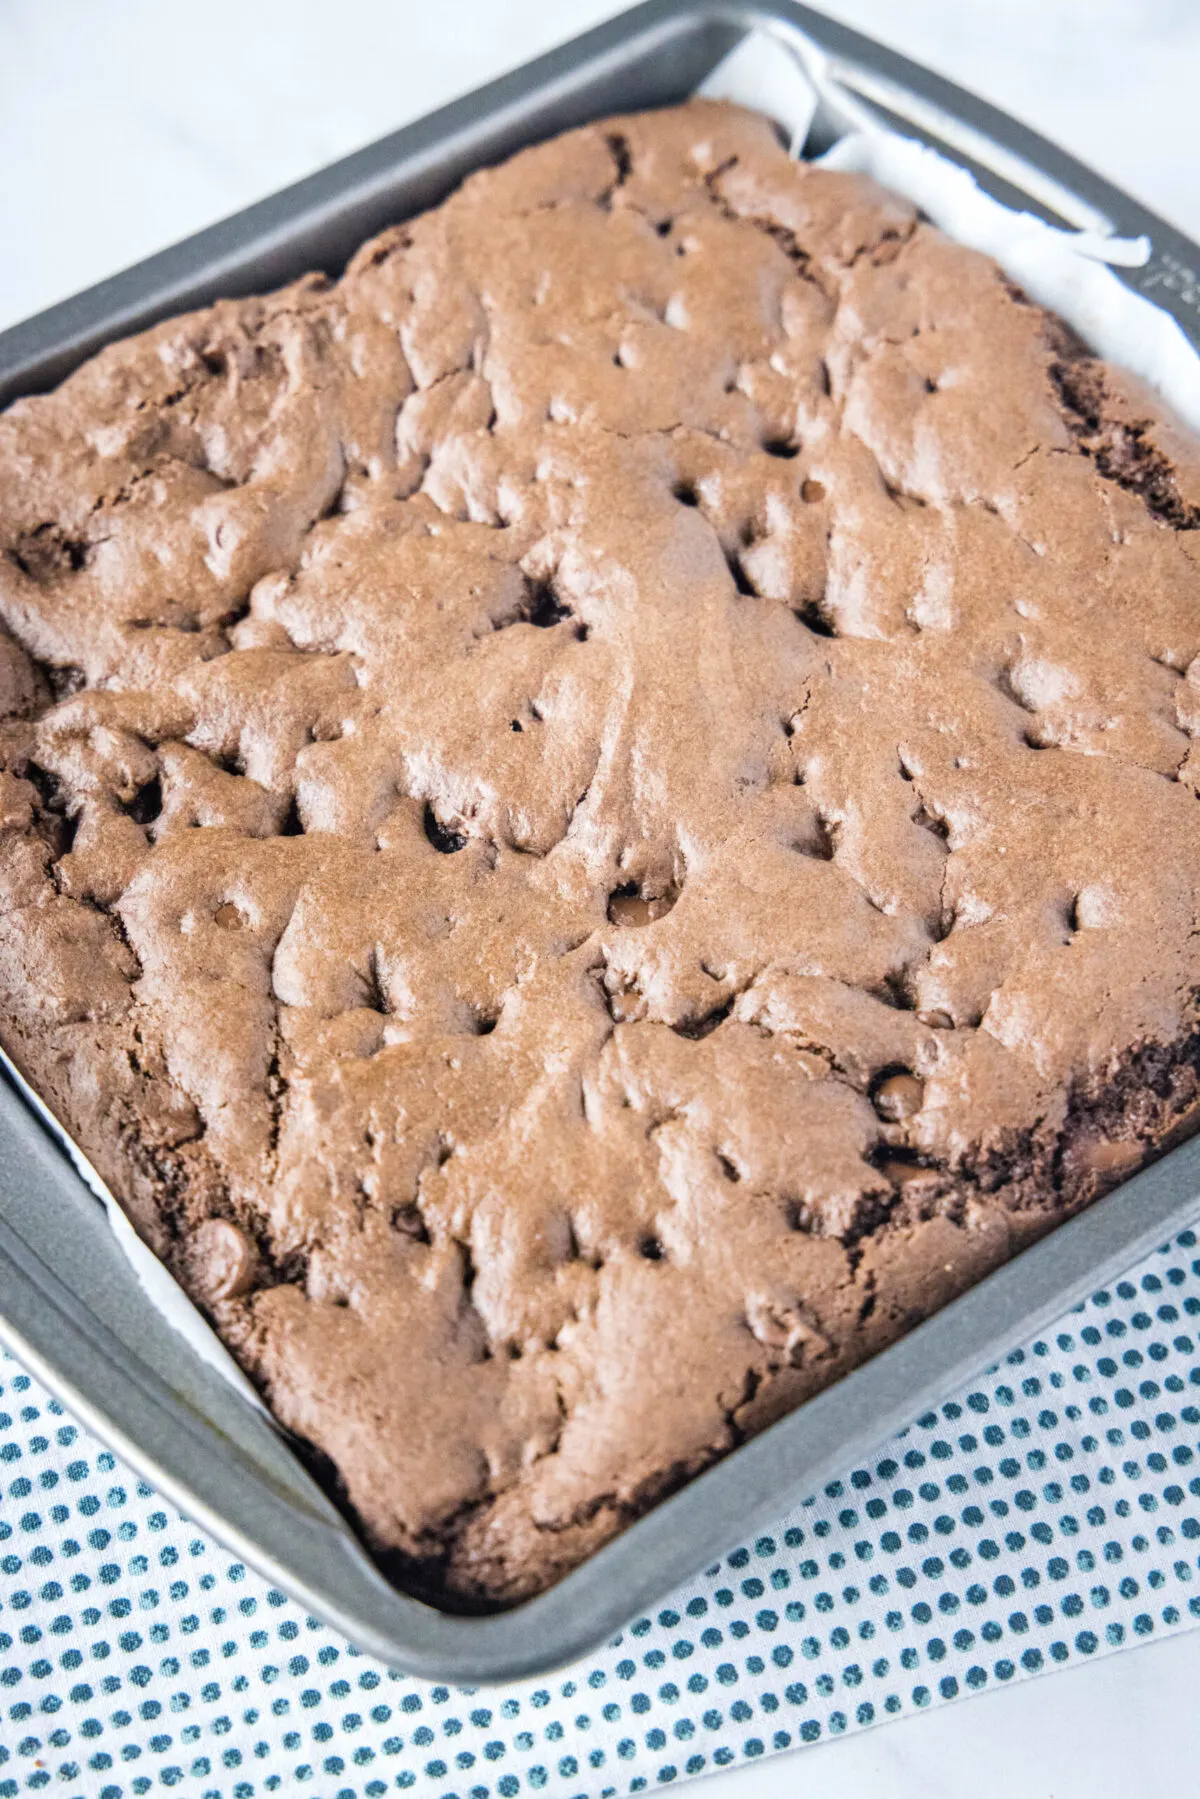 Overhead view of a square baking dish filled with brownies